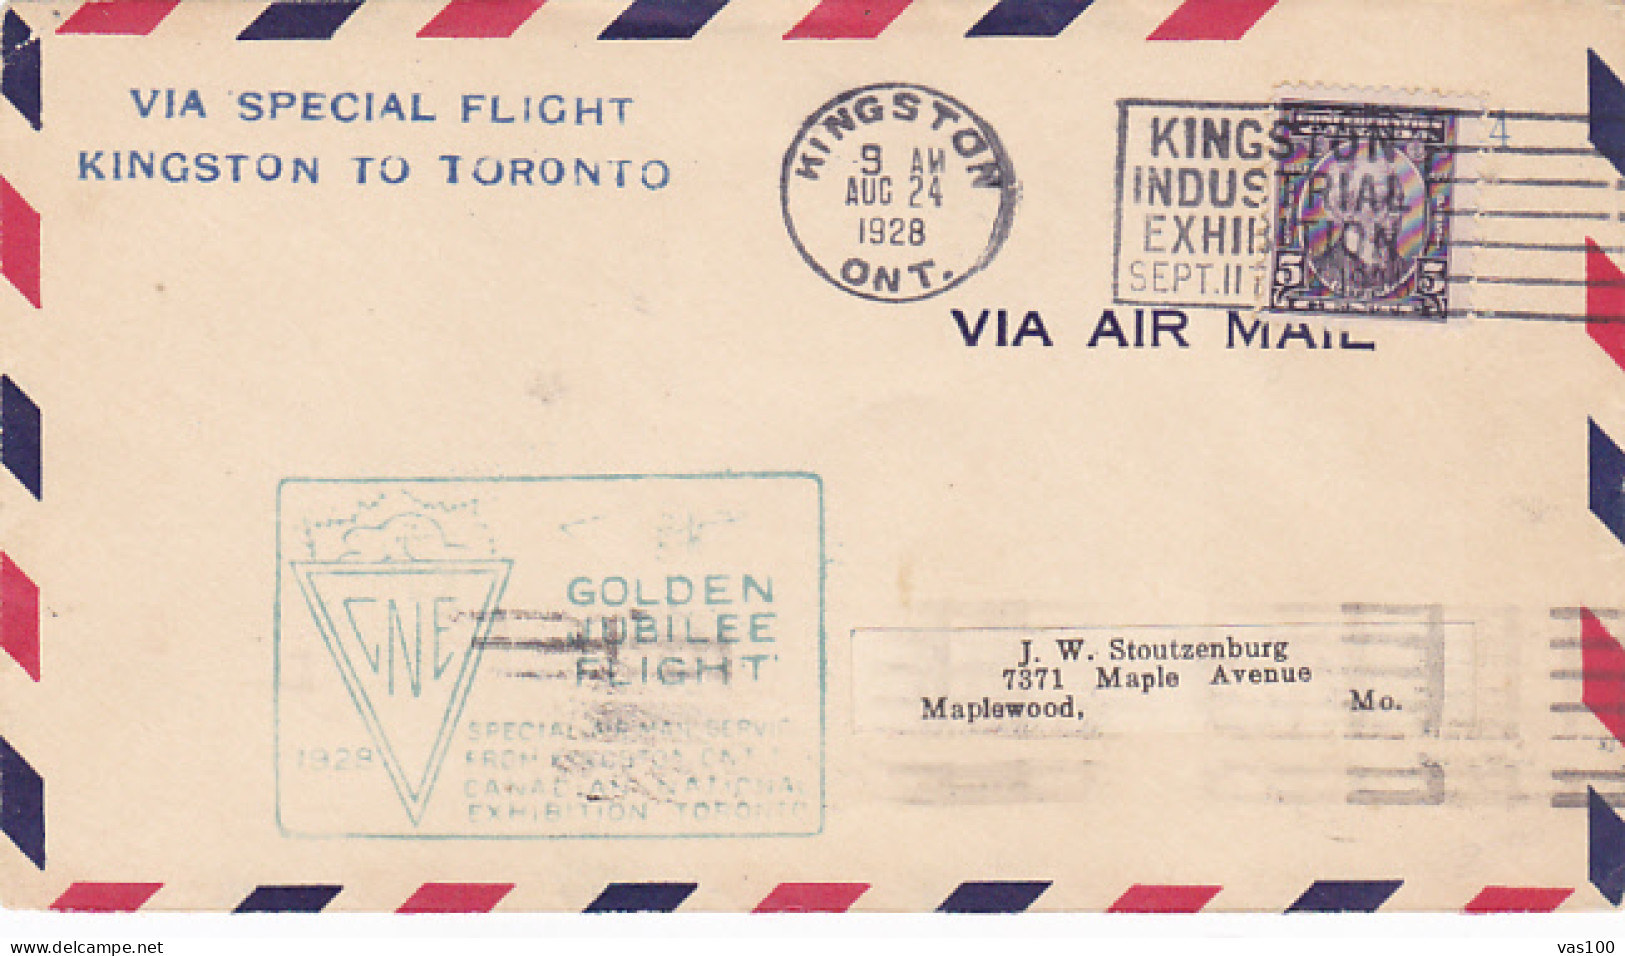 CNE GOLDEN JUBILEE FLIGHT, KINGSTON INDUSTRIAL EXHIBITION POSTMARKS, SIR LAURIER, STAMP ON COVER, 1928, CANADA - Lettres & Documents